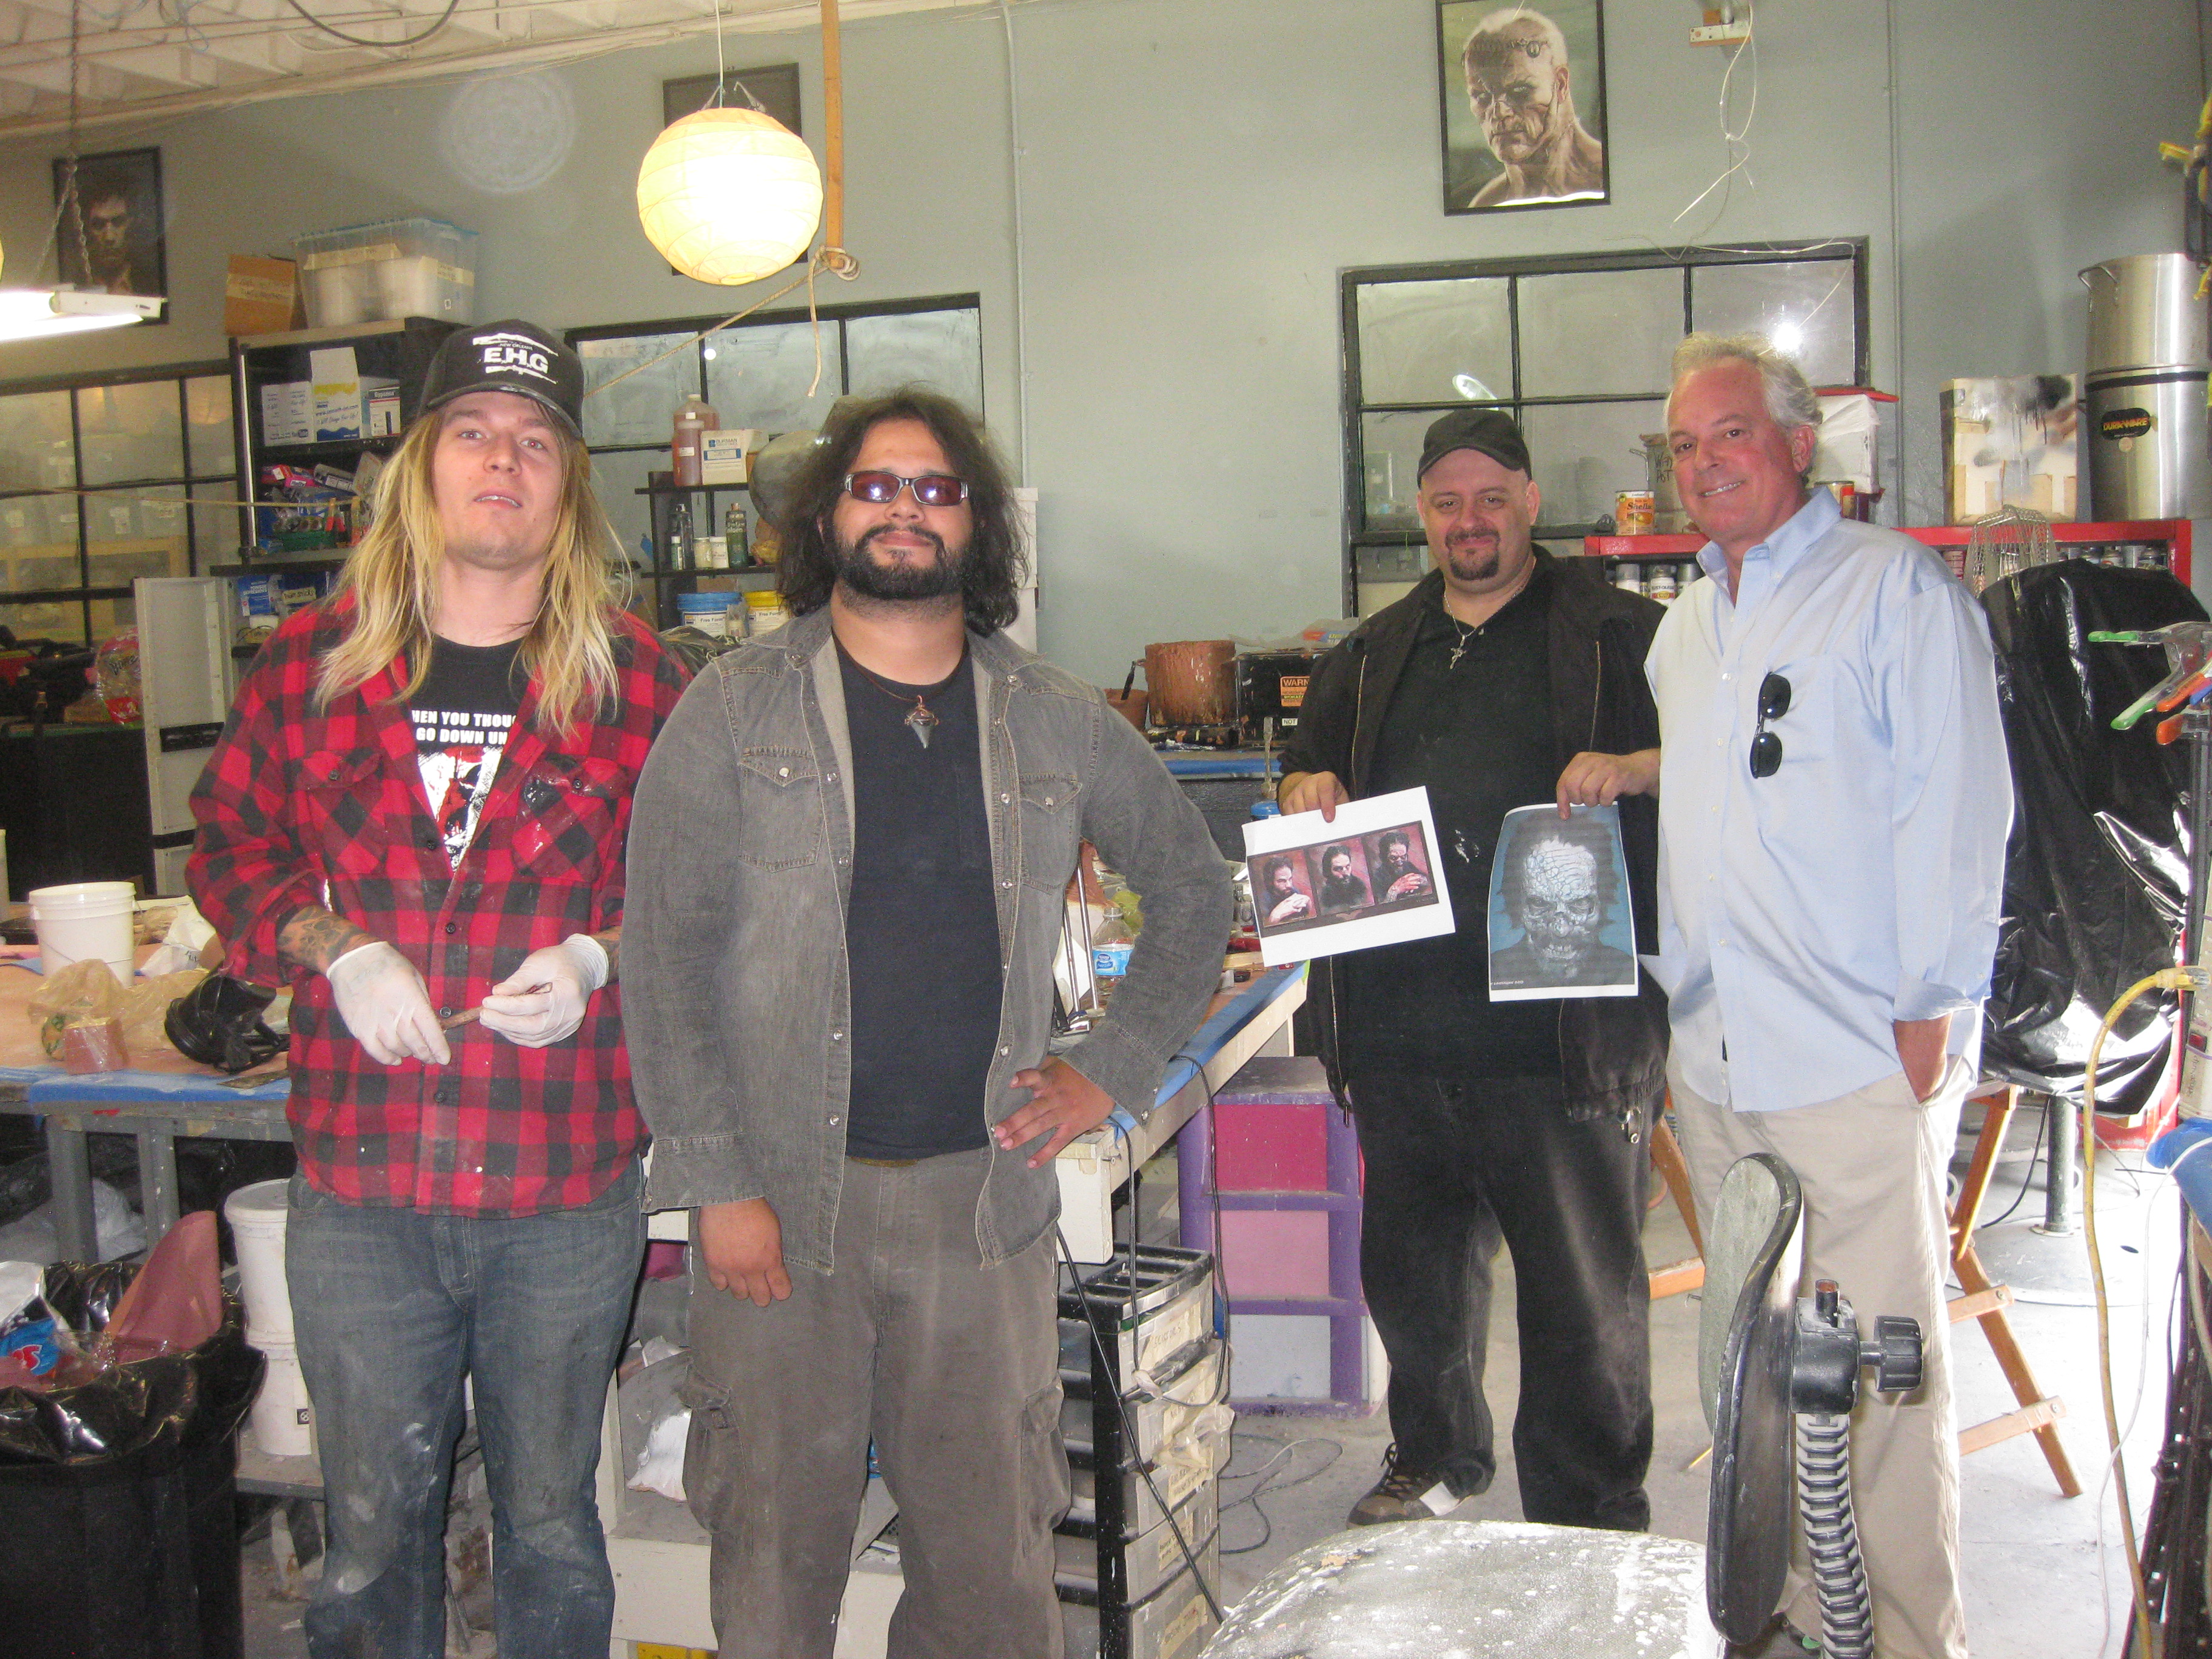 (L to R) Josh Wasylink, Josh Ballze, Vincent Guastini, R.Rothbard. VGP special makeup effects workshop for The Painting.